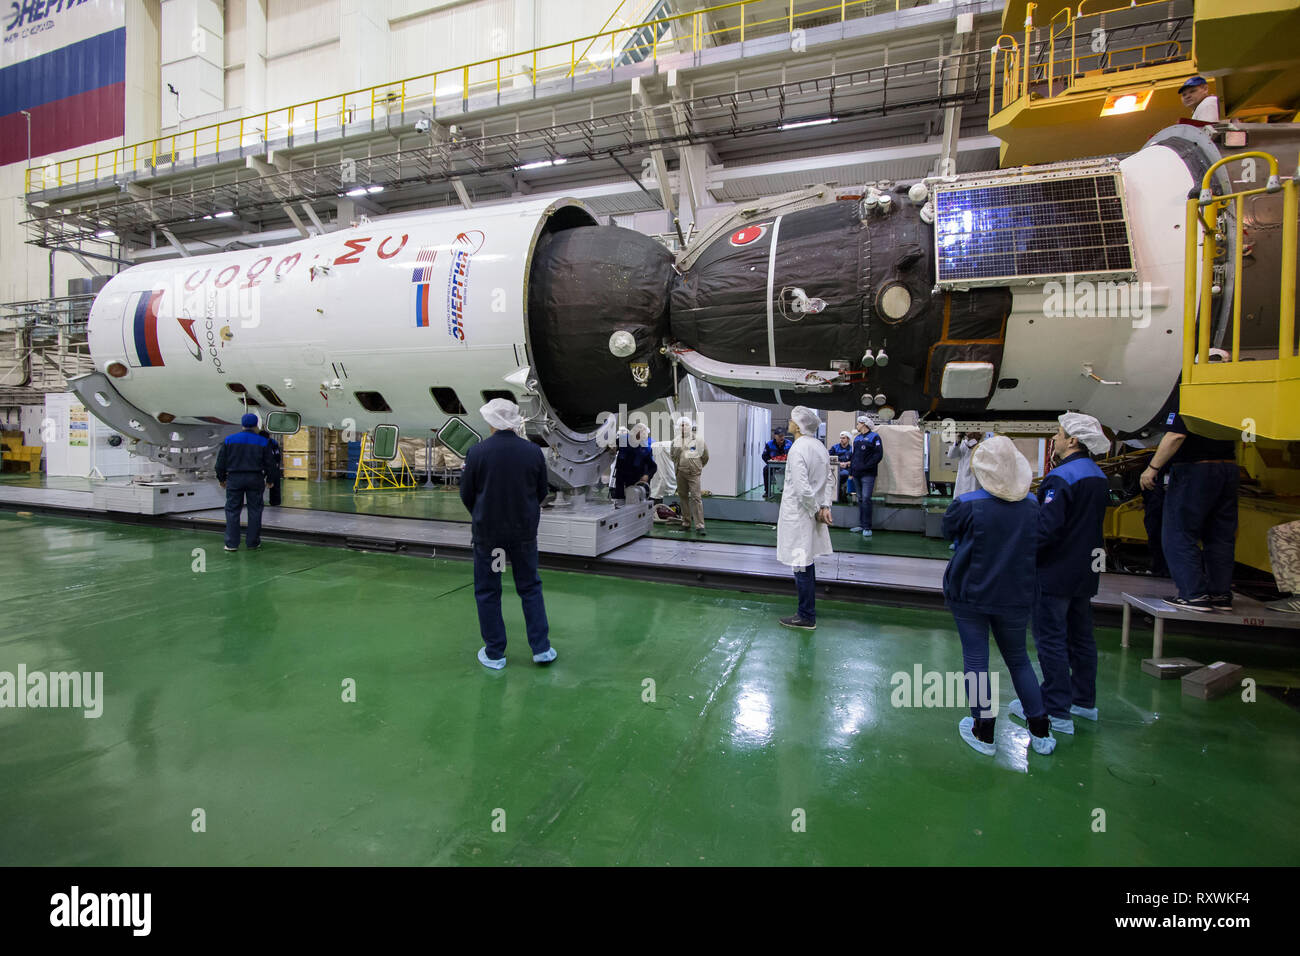 The Russian Soyuz MS-12 spacecraft is encapsulation into the nose fairing of the booster rocket in the Integration Building at the Baikonur Cosmodrome March 6, 2019 in Baikonur, Kazakhstan. The Expedition 59 crew: Nick Hague and Christina Koch of NASA and Alexey Ovchinin of Roscosmos will launch March 14th for a six-and-a-half month mission on the International Space Station. Stock Photo